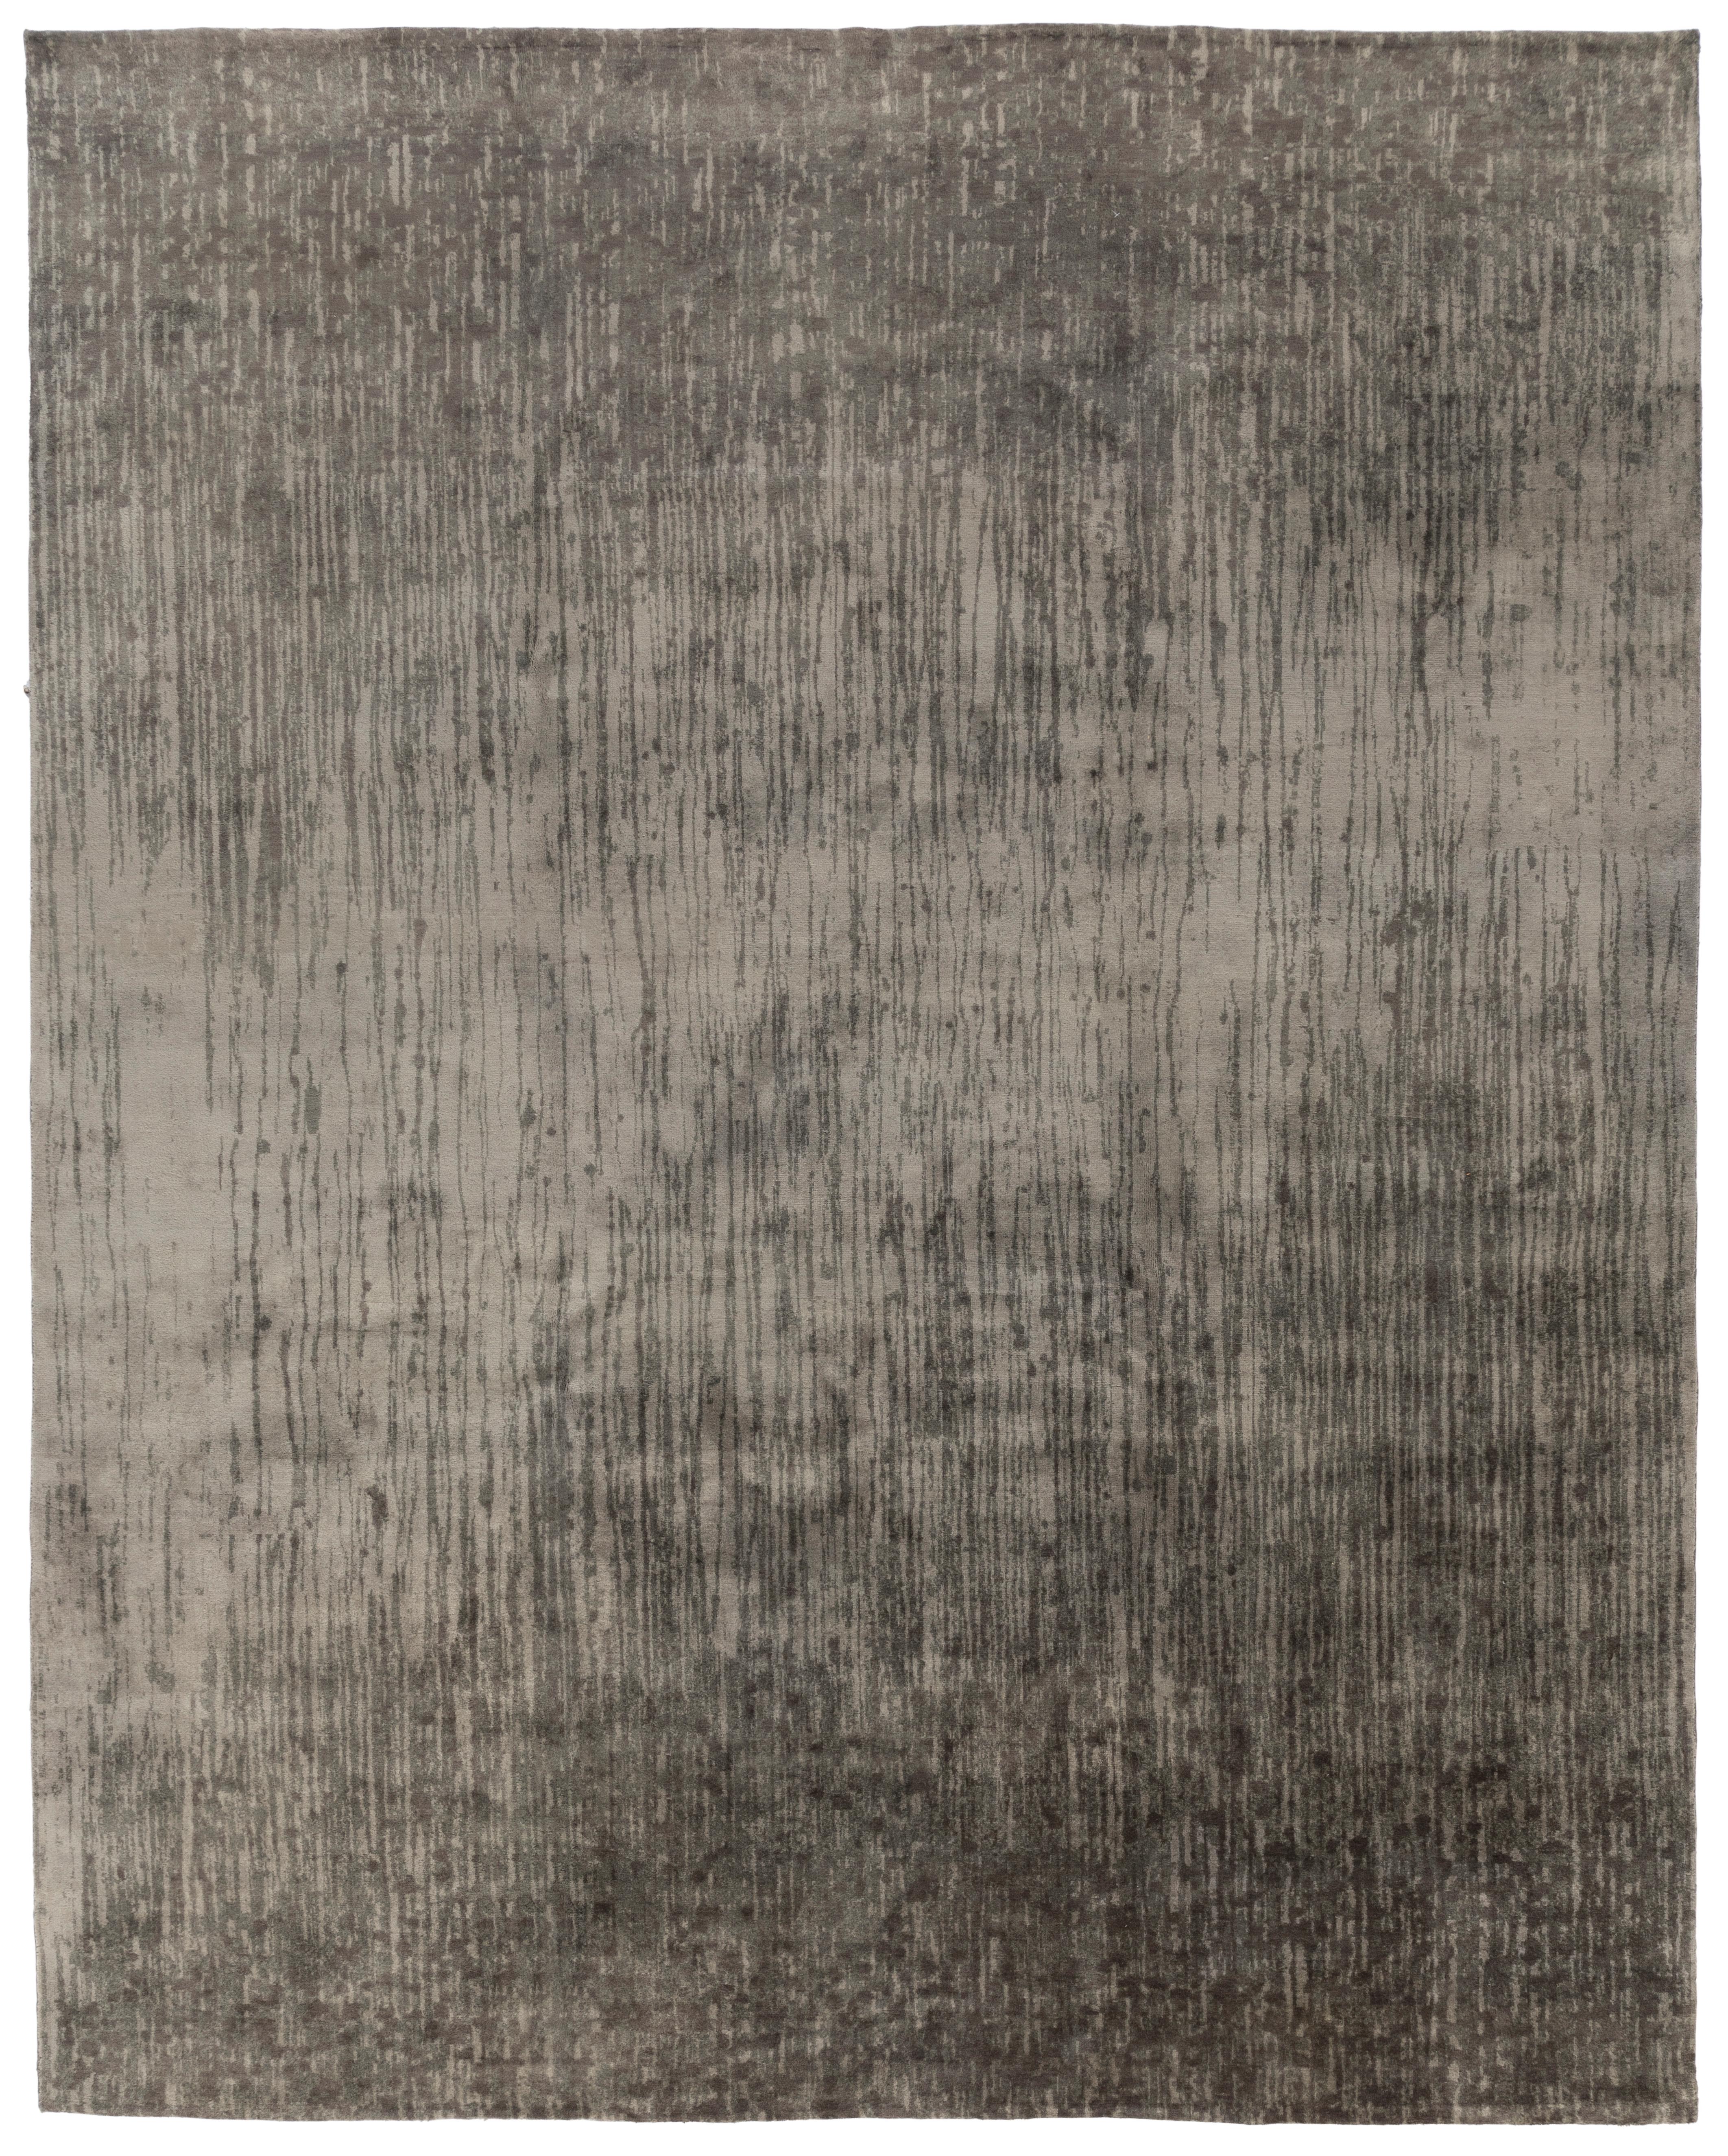 Waterfall Charcoal is a resilient 100% wool rug featuring an organic cataract pattern in subdued colors of medium gray, and light gray. This nature inspired design is sure to bring a sense of serenity to any room.